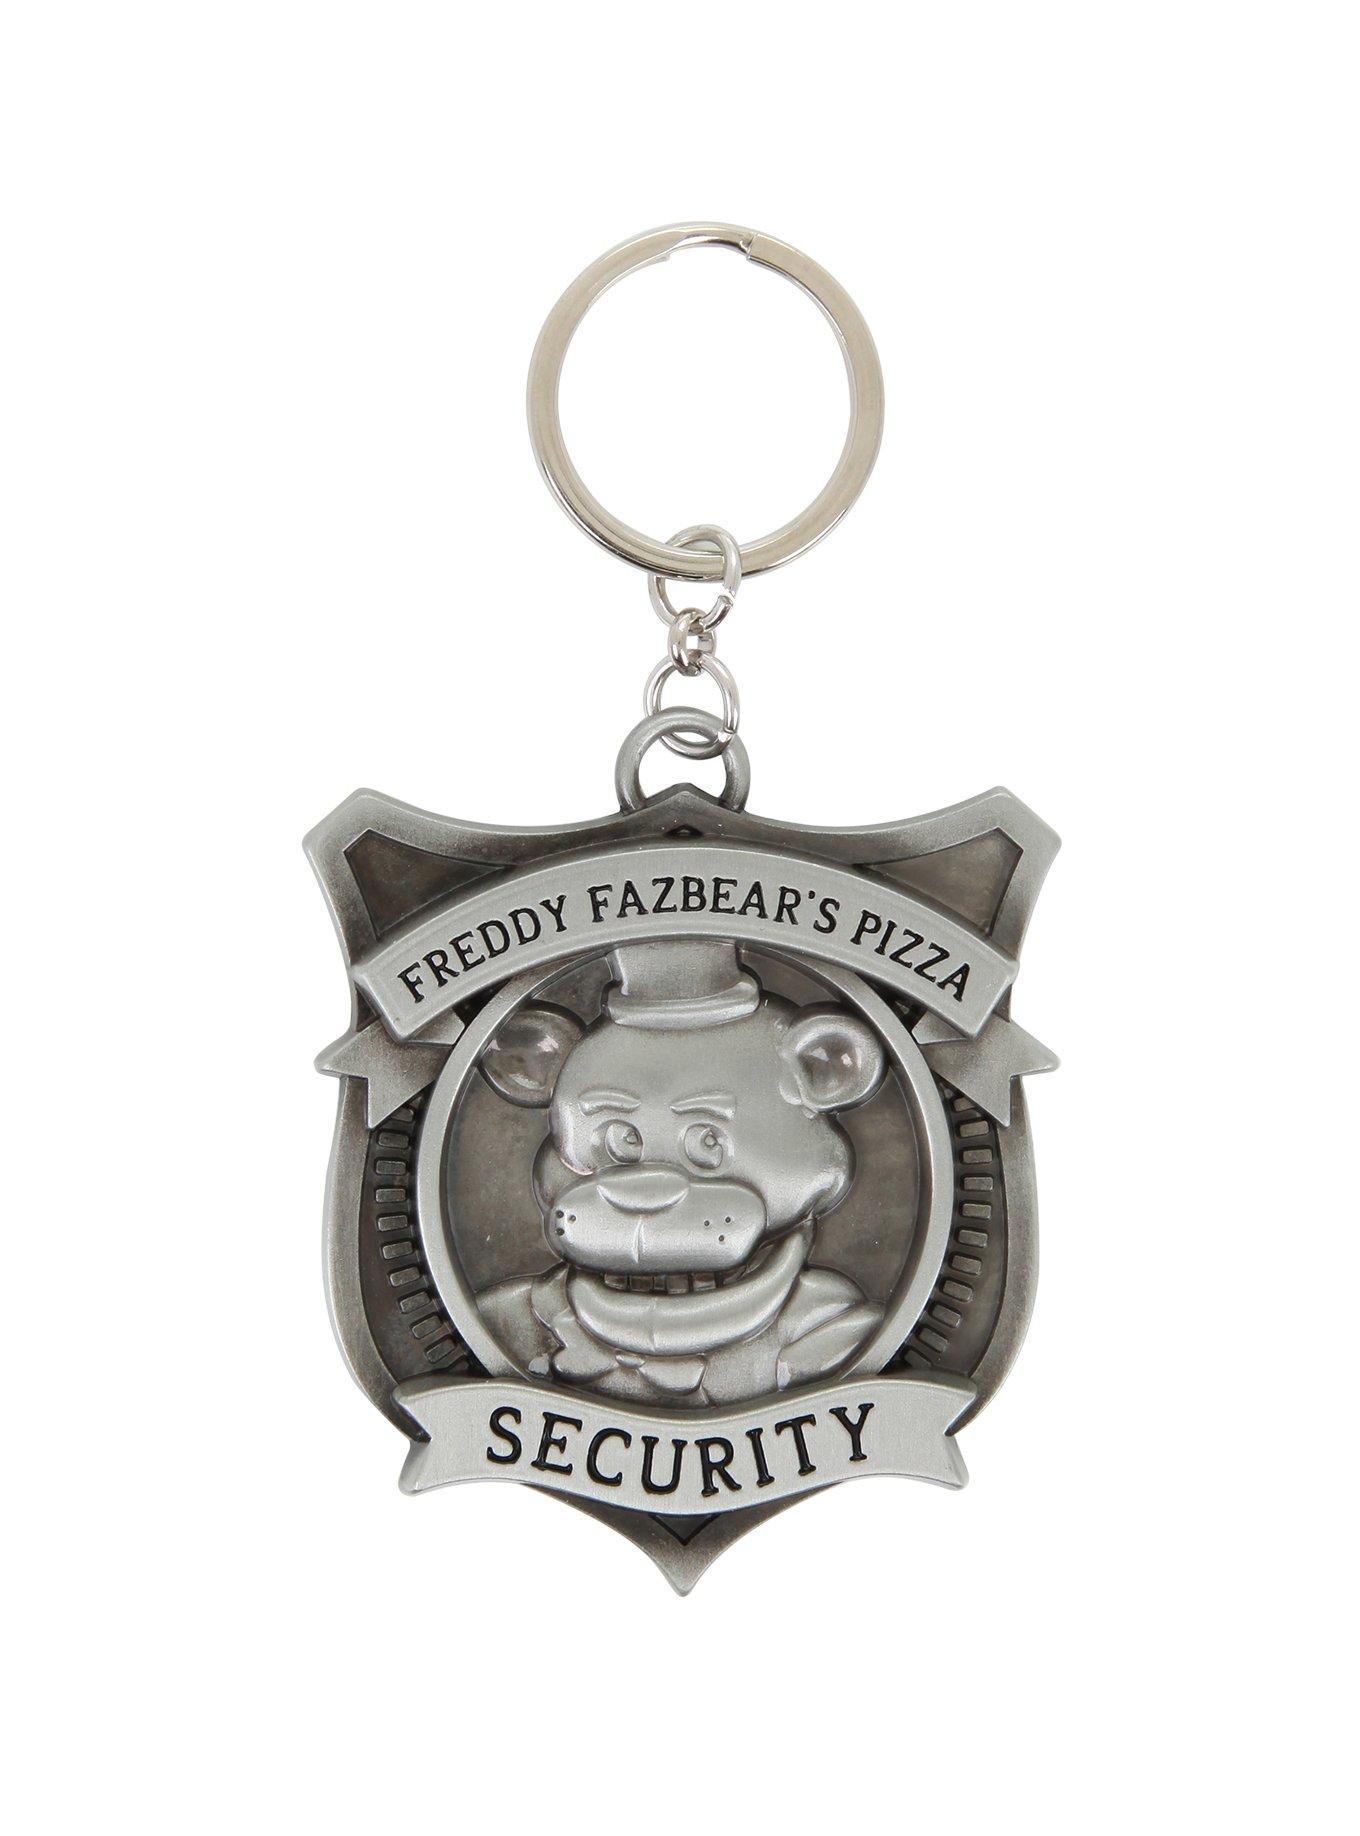 2 New FNAF Five Nights at Freddy's Security Badge Pin Silver Gifts